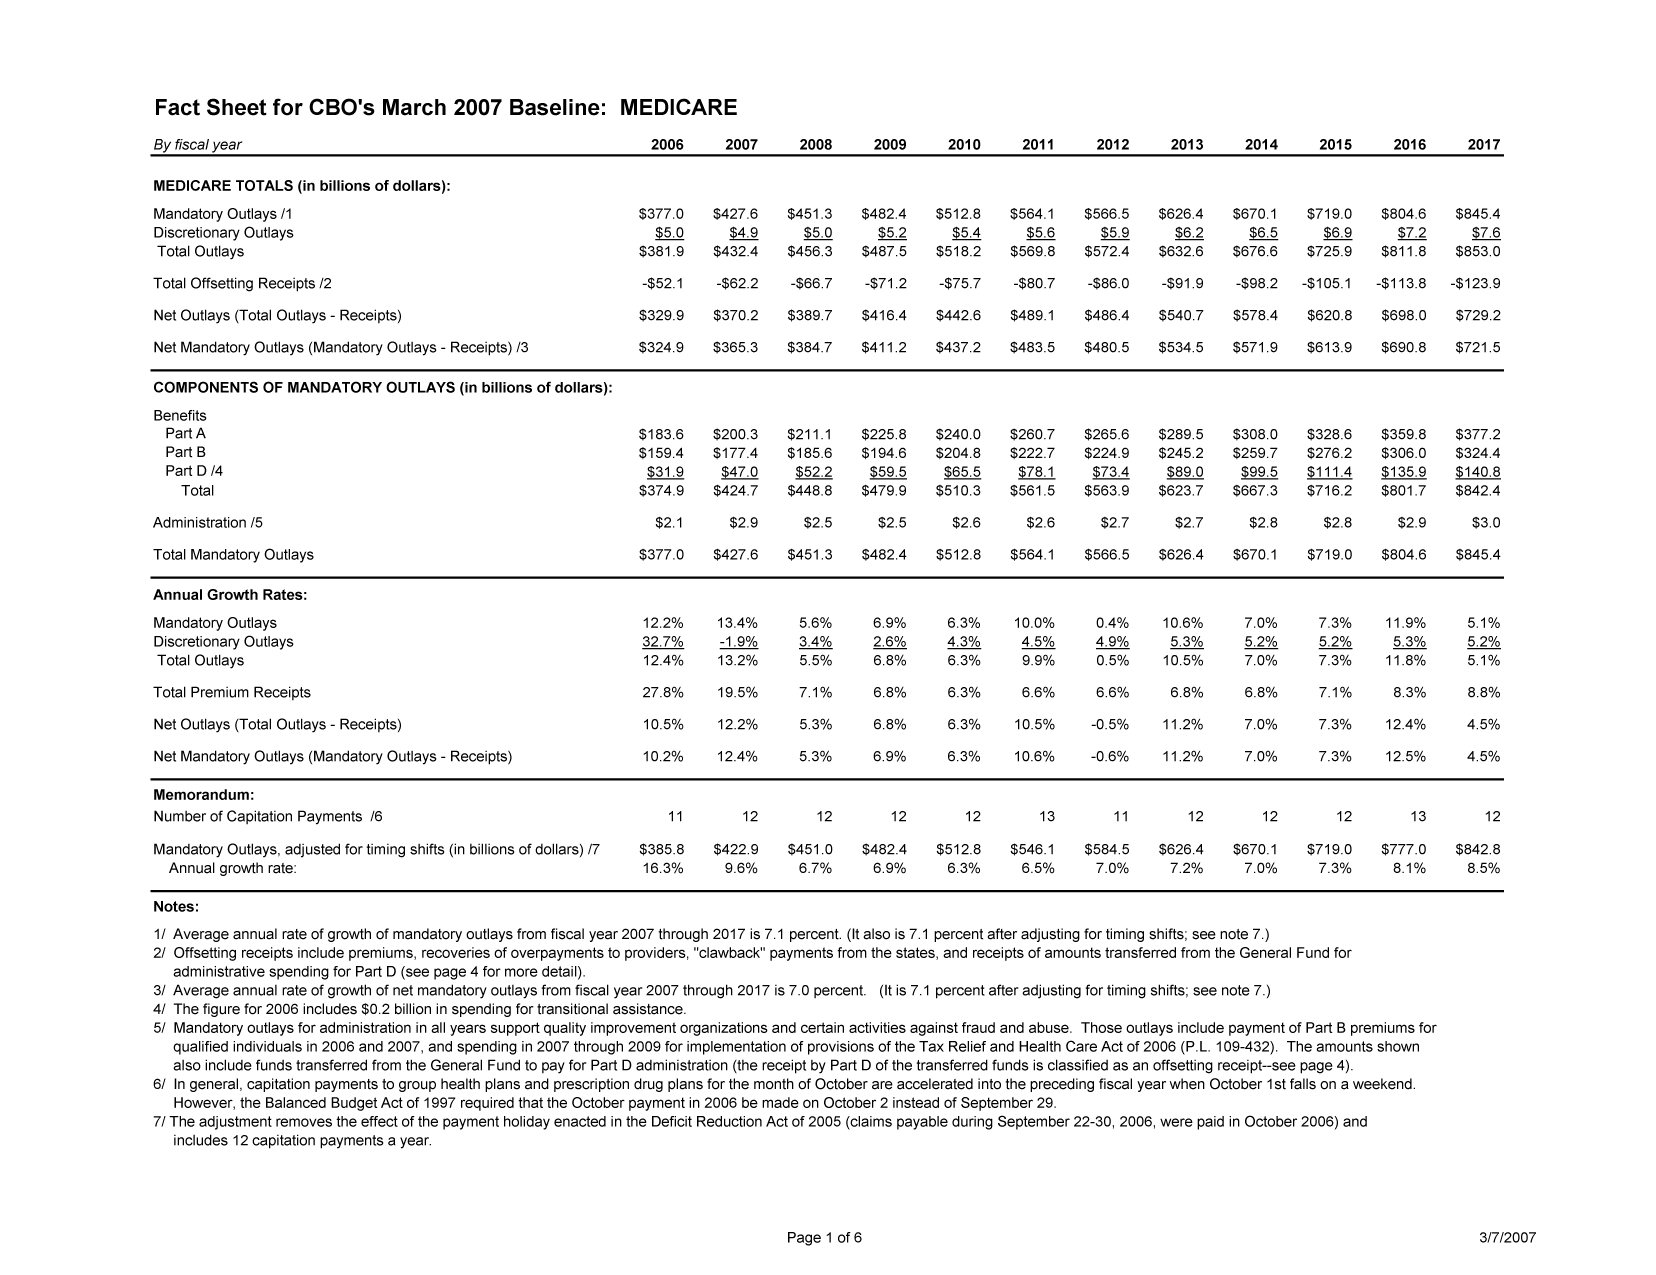 handle is hein.congrec/cbo9299 and id is 1 raw text is: Fact Sheet for CBO's March 2007 Baseline: MEDICARE
By fiscal year                                             2006    2007     2008     2009    2010     2011     2012     2013    2014     2015     2016     2017
MEDICARE TOTALS (in billions of dollars):
Mandatory Outlays /1                                     $377.0   $427.6  $451.3   $482.4   $512.8   $564.1  $566.5   $626.4   $670.1   $719.0  $804.6   $845.4
Discretionary Outlays                                      $5.0     $4.9    $5.0     $5.2     $5.4    $5.6     $5.9     $6.2     $6.5     $6.9    $7.2     $7.6
Total Outlays                                            $381.9  $432.4   $456.3   $487.5   $518.2  $569.8   $572.4   $632.6   $6766   $7259    $811.8   $8530
Total Offsetting Receipts /2                             -$52.1   -$62.2   -$66.7  -$71.2   -$75.7   -$80.7   -$86.0  -$91.9   -$98.2  -$105.1  -$113.8  -$123.9
Net Outlays (Total Outlays - Receipts)                   $329.9   $370.2  $389.7   $416.4   $442.6   $489.1  $486.4   $540.7   $578.4   $620.8  $698.0   $729.2
Net Mandatory Outlays (Mandatory Outlays - Receipts) /3  $324.9   $365.3  $384.7   $411.2   $437.2   $483.5  $480.5   $534.5   $571.9   $613.9  $690.8   $721.5
COMPONENTS OF MANDATORY OUTLAYS (in billions of dollars):
Benefits
Part A                                                  $183.6  $200.3   $211.1   $225.8  $240.0   $260.7   $265.6   $289.5  $308.0   $328.6   $359.8   $377.2
Part B                                                  $159.4  $177.4   $185.6   $194.6  $204.8   $222.7   $224.9   $245.2  $259.7   $276.2   $306.0   $324.4
Part D /4                                               $31.9    $47.0    $52.2    $59.5   $65.5    $78.1    $73.4    $89.0   $99.5   $111.4   $135.9   $140.8
Total                                                 $374.9   $424.7  $448.8   $479.9   $510.3  $561.5   $563.9   $623.7   $667.3  $716.2   $801.7   $842.4
Administration /5                                          $2.1     $2.9     $2.5    $2.5     $2.6     $2.6     $2.7    $2.7     $2.8     $2.8     $2.9    $3.0
Total Mandatory Outlays                                  $377.0   $427.6   $451.3  $482.4   $512.8   $564.1   $566.5  $626.4   $670.1   $719.0   $804.6  $845.4
Annual Growth Rates:
Mandatory Outlays                                         12.2%   13.4%     5.6%     6.9%    6.3%    10.0%     0.4%    10.6%    7.0%     7.3%    11.9%     5.1%
Discretionary Outlays                                    32.7%    -1.9%     3.4%     2.6%    4.3%     4.5%     4.9%    5.3%     5.2%     5.2%     5.3%    5.2%
Total Outlays                                            12.4%    13.2%    5.5%     6.8%     6.3%     9.9%    0.5%    10.5%     7.0%     7.3%   11.8%     5.1%
Total Premium Receipts                                   27.8%    19.5%     7.1%     6.8%    6.3%     6.6%     6.6%     6.8%    6.8%     7.1%     8.3%     8.8%
Net Outlays (Total Outlays - Receipts)                    10.5%   12.2%     5.3%     6.8%    6.3%    10.5%    -0.5%    11.2%    7.0%     7.3%    12.4%    4.5%
Net Mandatory Outlays (Mandatory Outlays - Receipts)      10.2%   12.4%     5.3%     6.9%    6.3%    10.6%    -0.6%    11.2%    7.0%     7.3%    12.5%    4.5%
Memorandum:

Number of Capitation Payments /6

11        12        12        12        12        13       11        12        12        12        13        12

Mandatory Outlays, adjusted for timing shifts (in billions of dollars) /7  $385.8  $422.9  $451.0  $482.4  $512.8  $546.1  $584.5  $626.4  $670.1  $719.0  $777.0  $842.8
Annual growth rate:                                       16.3%     9.6%      6.7%     6.9%     6.3%     6.5%     7.0%     7.2%     7.0%      7.3%     8.1%     8.5%
Notes:
1/ Average annual rate of growth of mandatory outlays from fiscal year 2007 through 2017 is 7.1 percent. (It also is 7.1 percent after adjusting for timing shifts; see note 7.)
2/ Offsetting receipts include premiums, recoveries of overpayments to providers, clawback payments from the states, and receipts of amounts transferred from the General Fund for
administrative spending for Part D (see page 4 for more detail).
3/ Average annual rate of growth of net mandatory outlays from fiscal year 2007 through 2017 is 7.0 percent. (It is 7.1 percent after adjusting for timing shifts; see note 7.)
4/ The figure for 2006 includes $0.2 billion in spending for transitional assistance.
5/ Mandatory outlays for administration in all years support quality improvement organizations and certain activities against fraud and abuse. Those outlays include payment of Part B premiums for
qualified individuals in 2006 and 2007, and spending in 2007 through 2009 for implementation of provisions of the Tax Relief and Health Care Act of 2006 (P.L. 109-432). The amounts shown
also include funds transferred from the General Fund to pay for Part D administration (the receipt by Part D of the transferred funds is classified as an offsetting receipt--see page 4).
6/ In general, capitation payments to group health plans and prescription drug plans for the month of October are accelerated into the preceding fiscal year when October 1st falls on a weekend.
However, the Balanced Budget Act of 1997 required that the October payment in 2006 be made on October 2 instead of September 29.
7/ The adjustment removes the effect of the payment holiday enacted in the Deficit Reduction Act of 2005 (claims payable during September 22-30, 2006, were paid in October 2006) and
includes 12 capitation payments a year.

Page 1 of 6

3/7/2007


